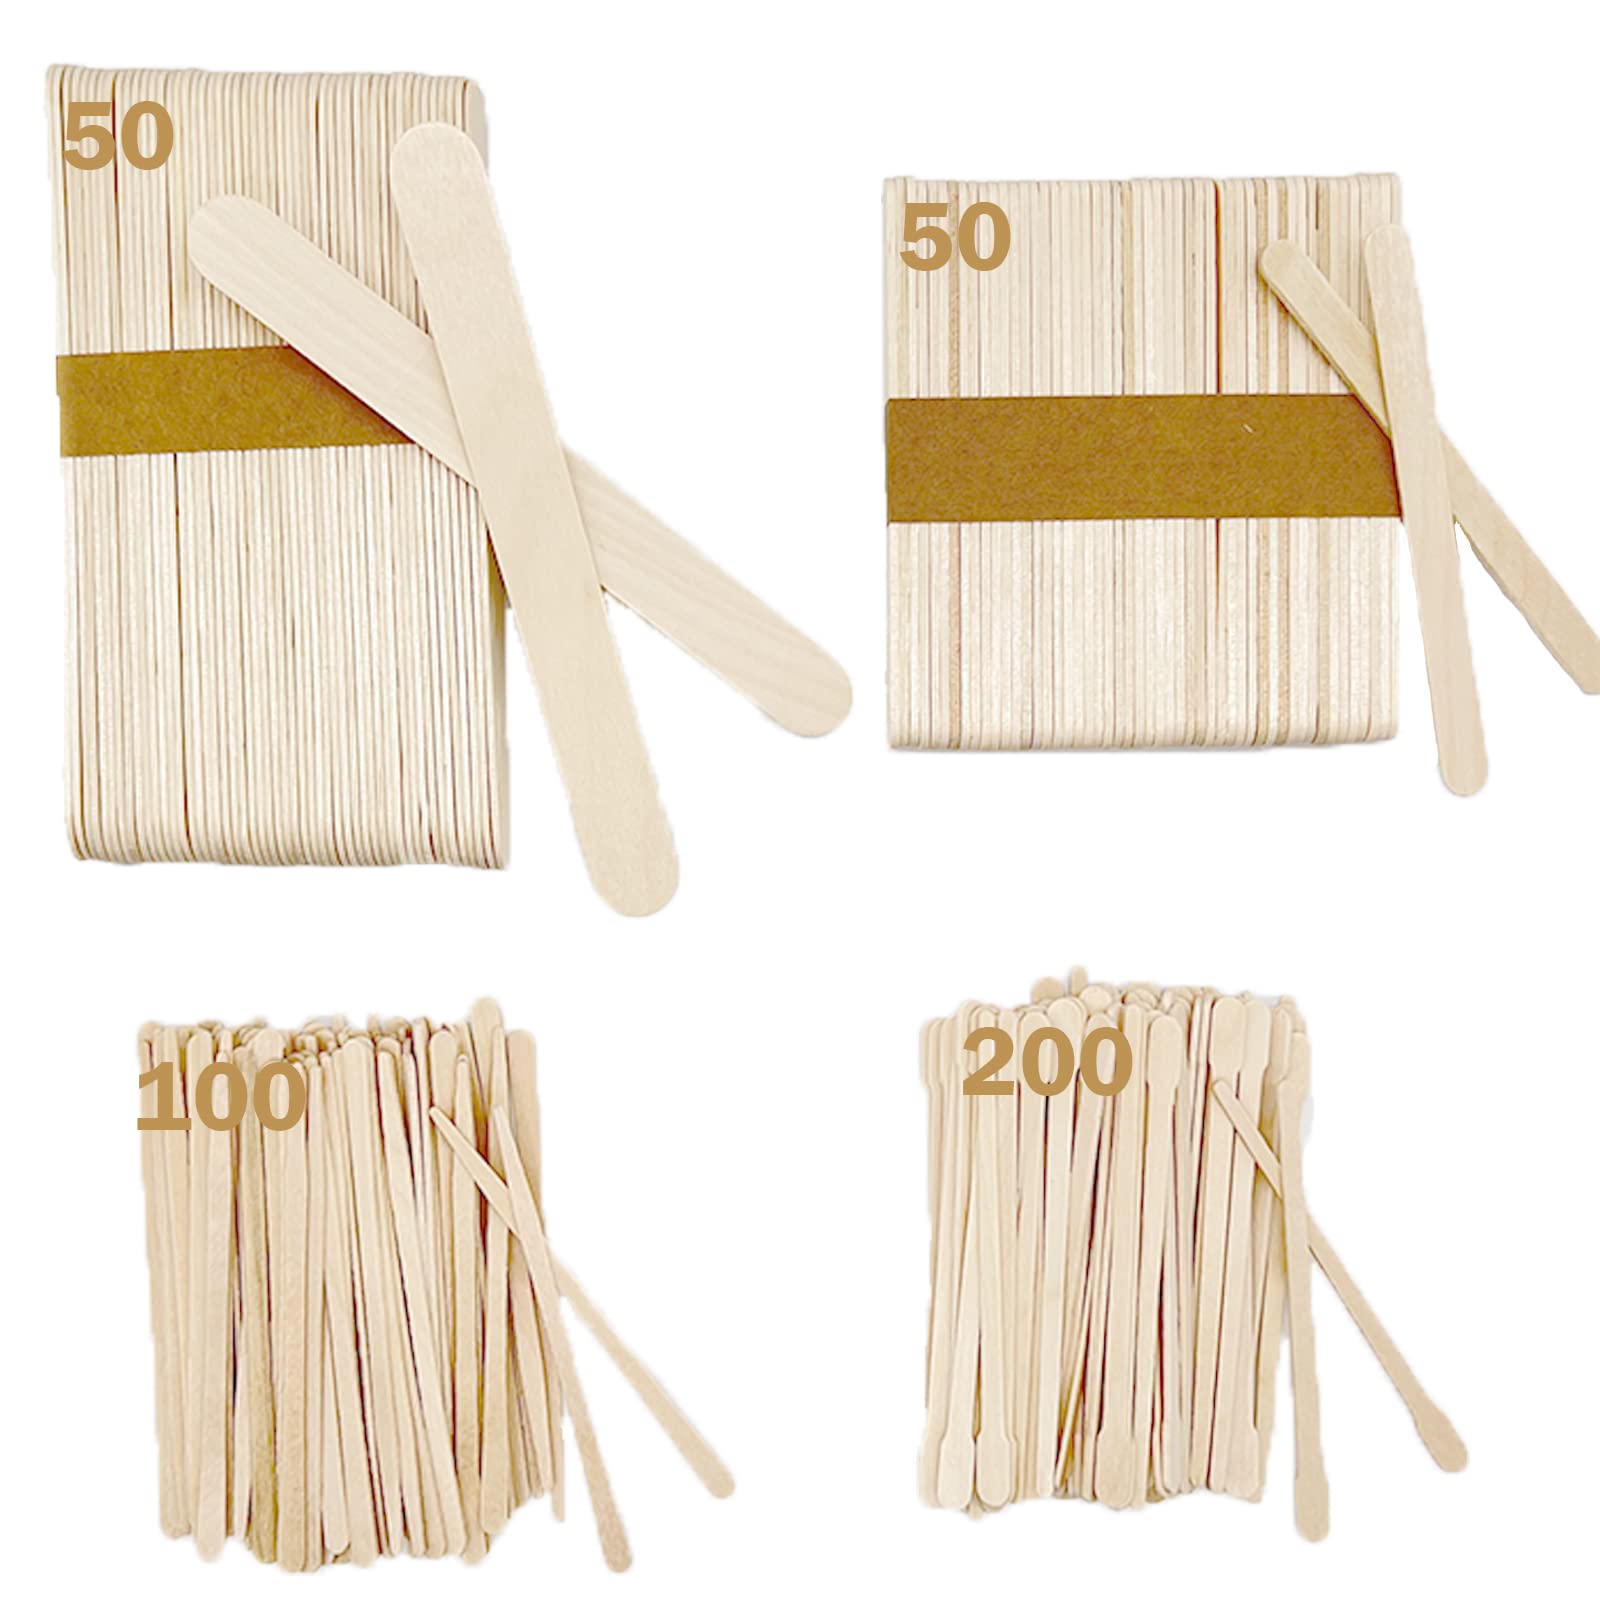 450PCS Wooden Wax Sticks, JANYUN Assorted Style Waxing Wooden Applicator  Wax Spatulas Kit for Eyebrow Face for Hair Removal Body Legs Facial,Wood